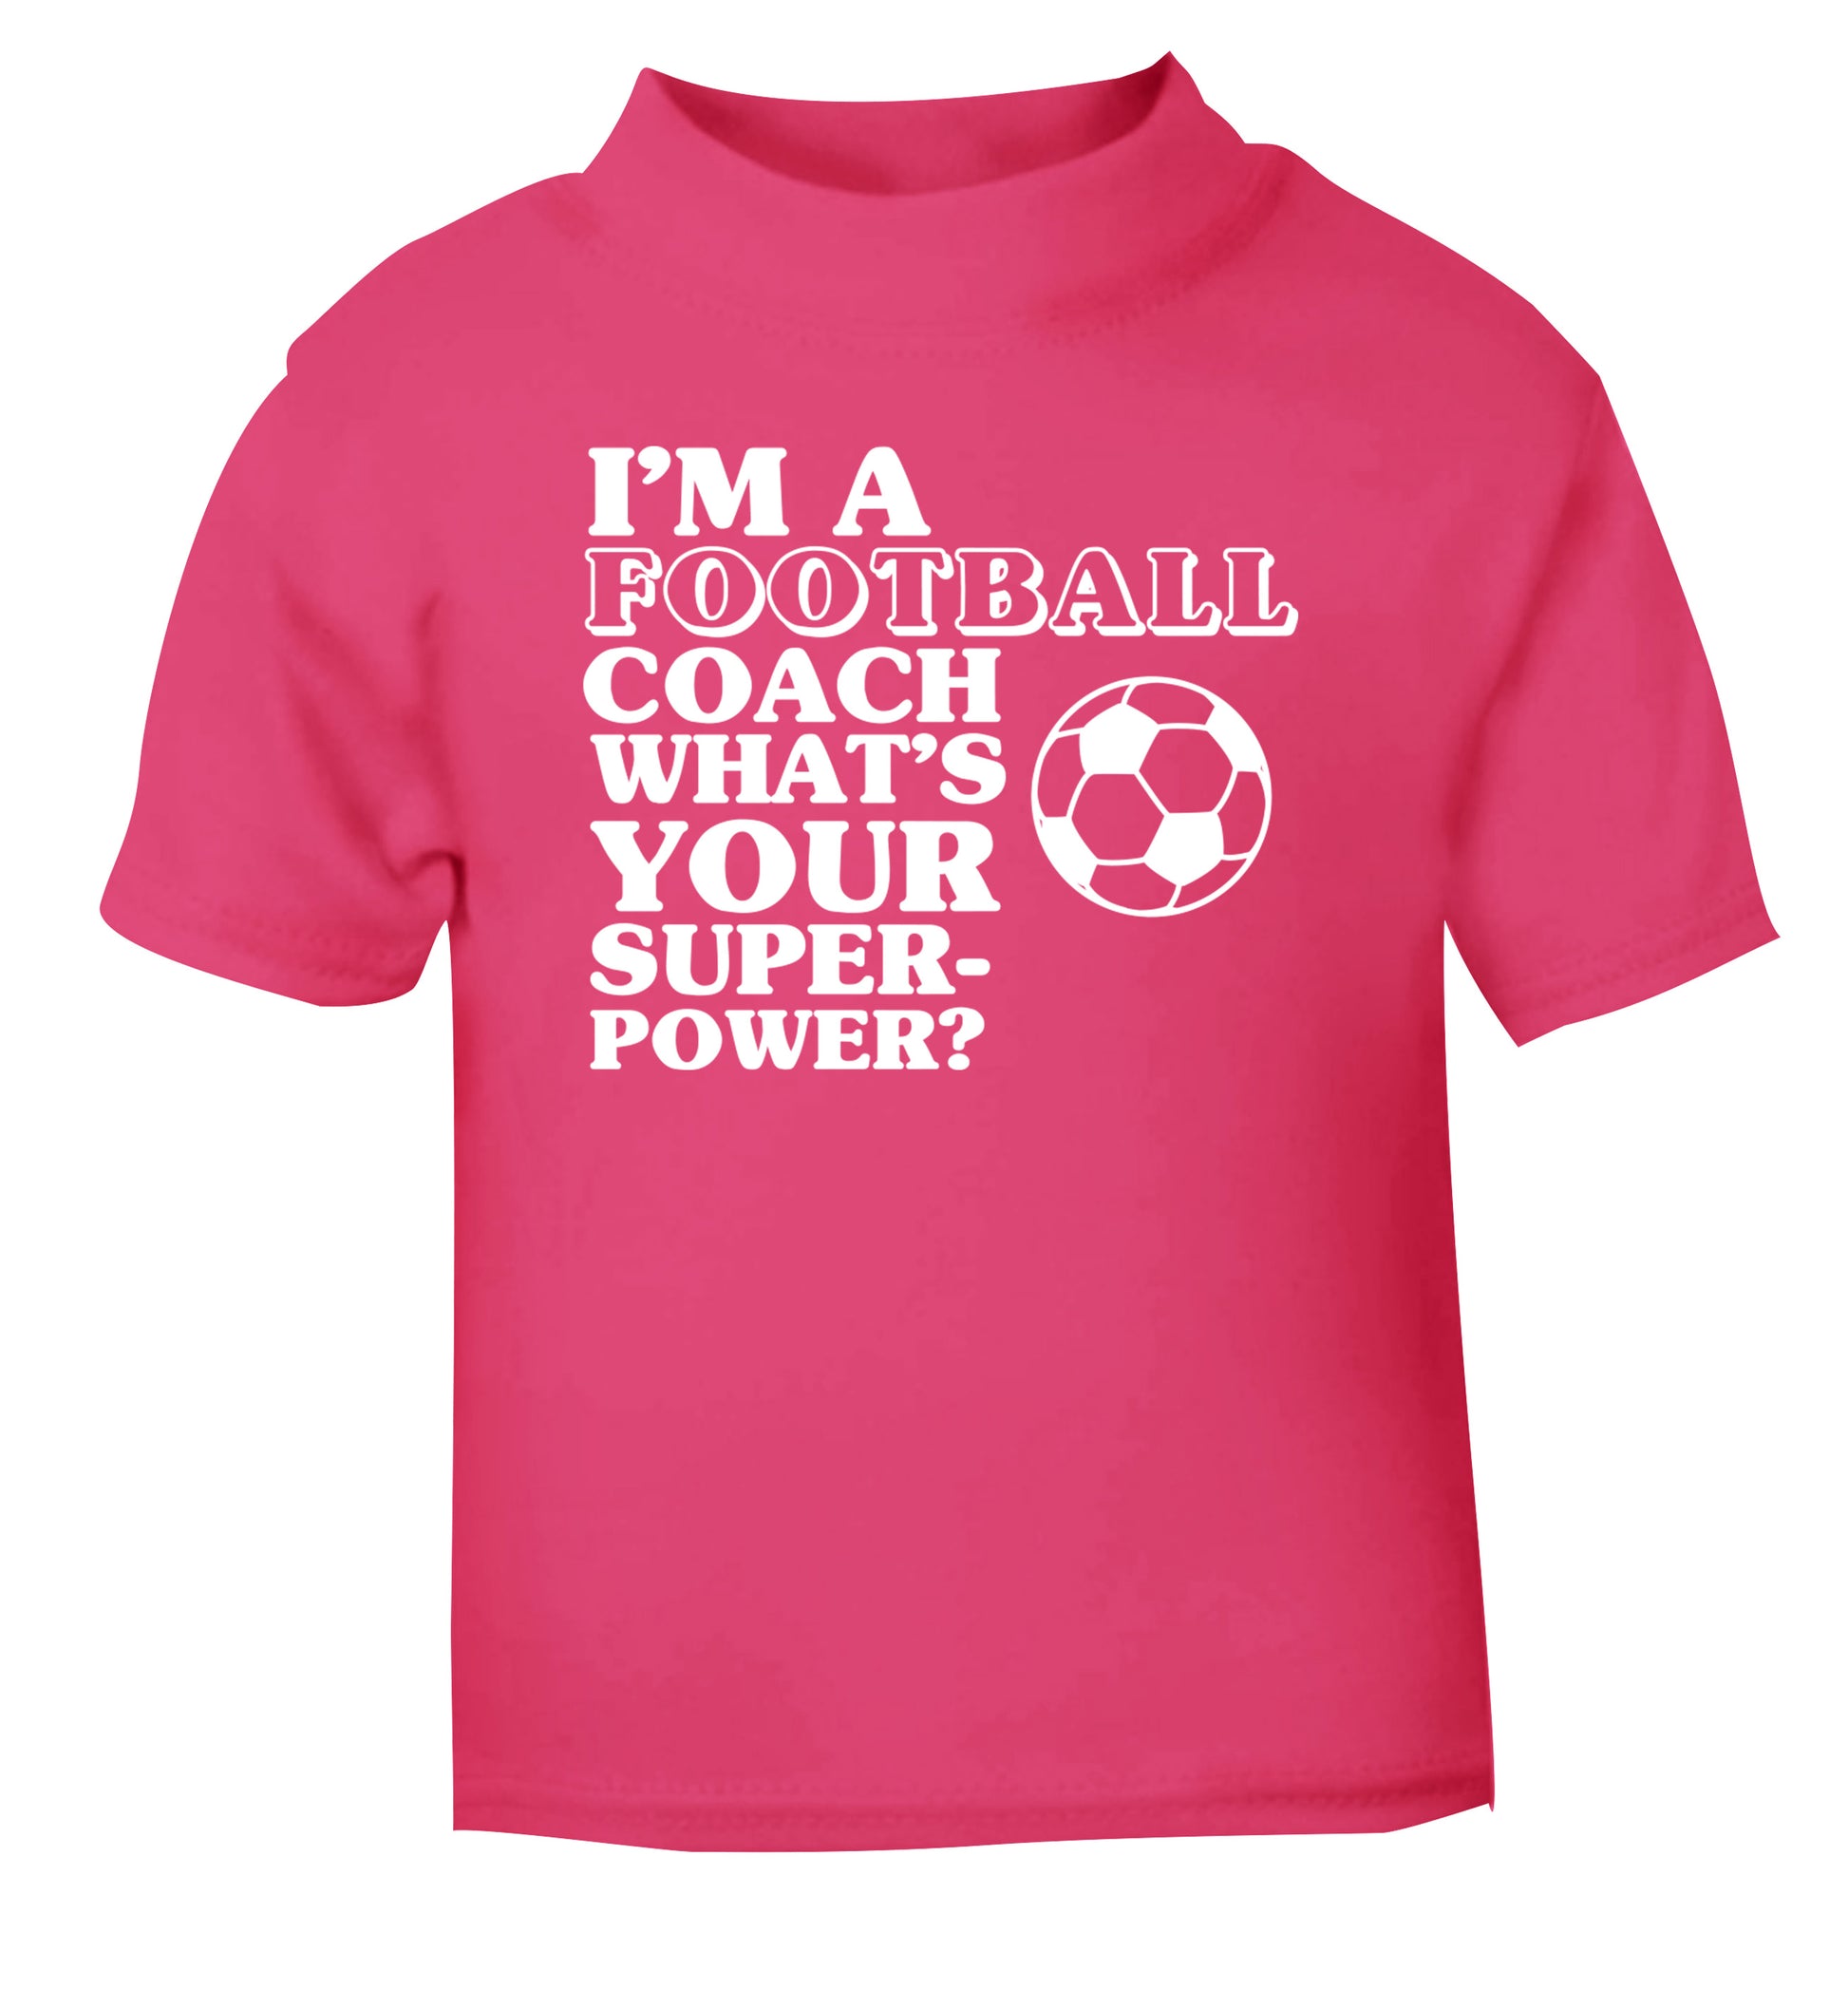 I'm a football coach what's your superpower? pink Baby Toddler Tshirt 2 Years